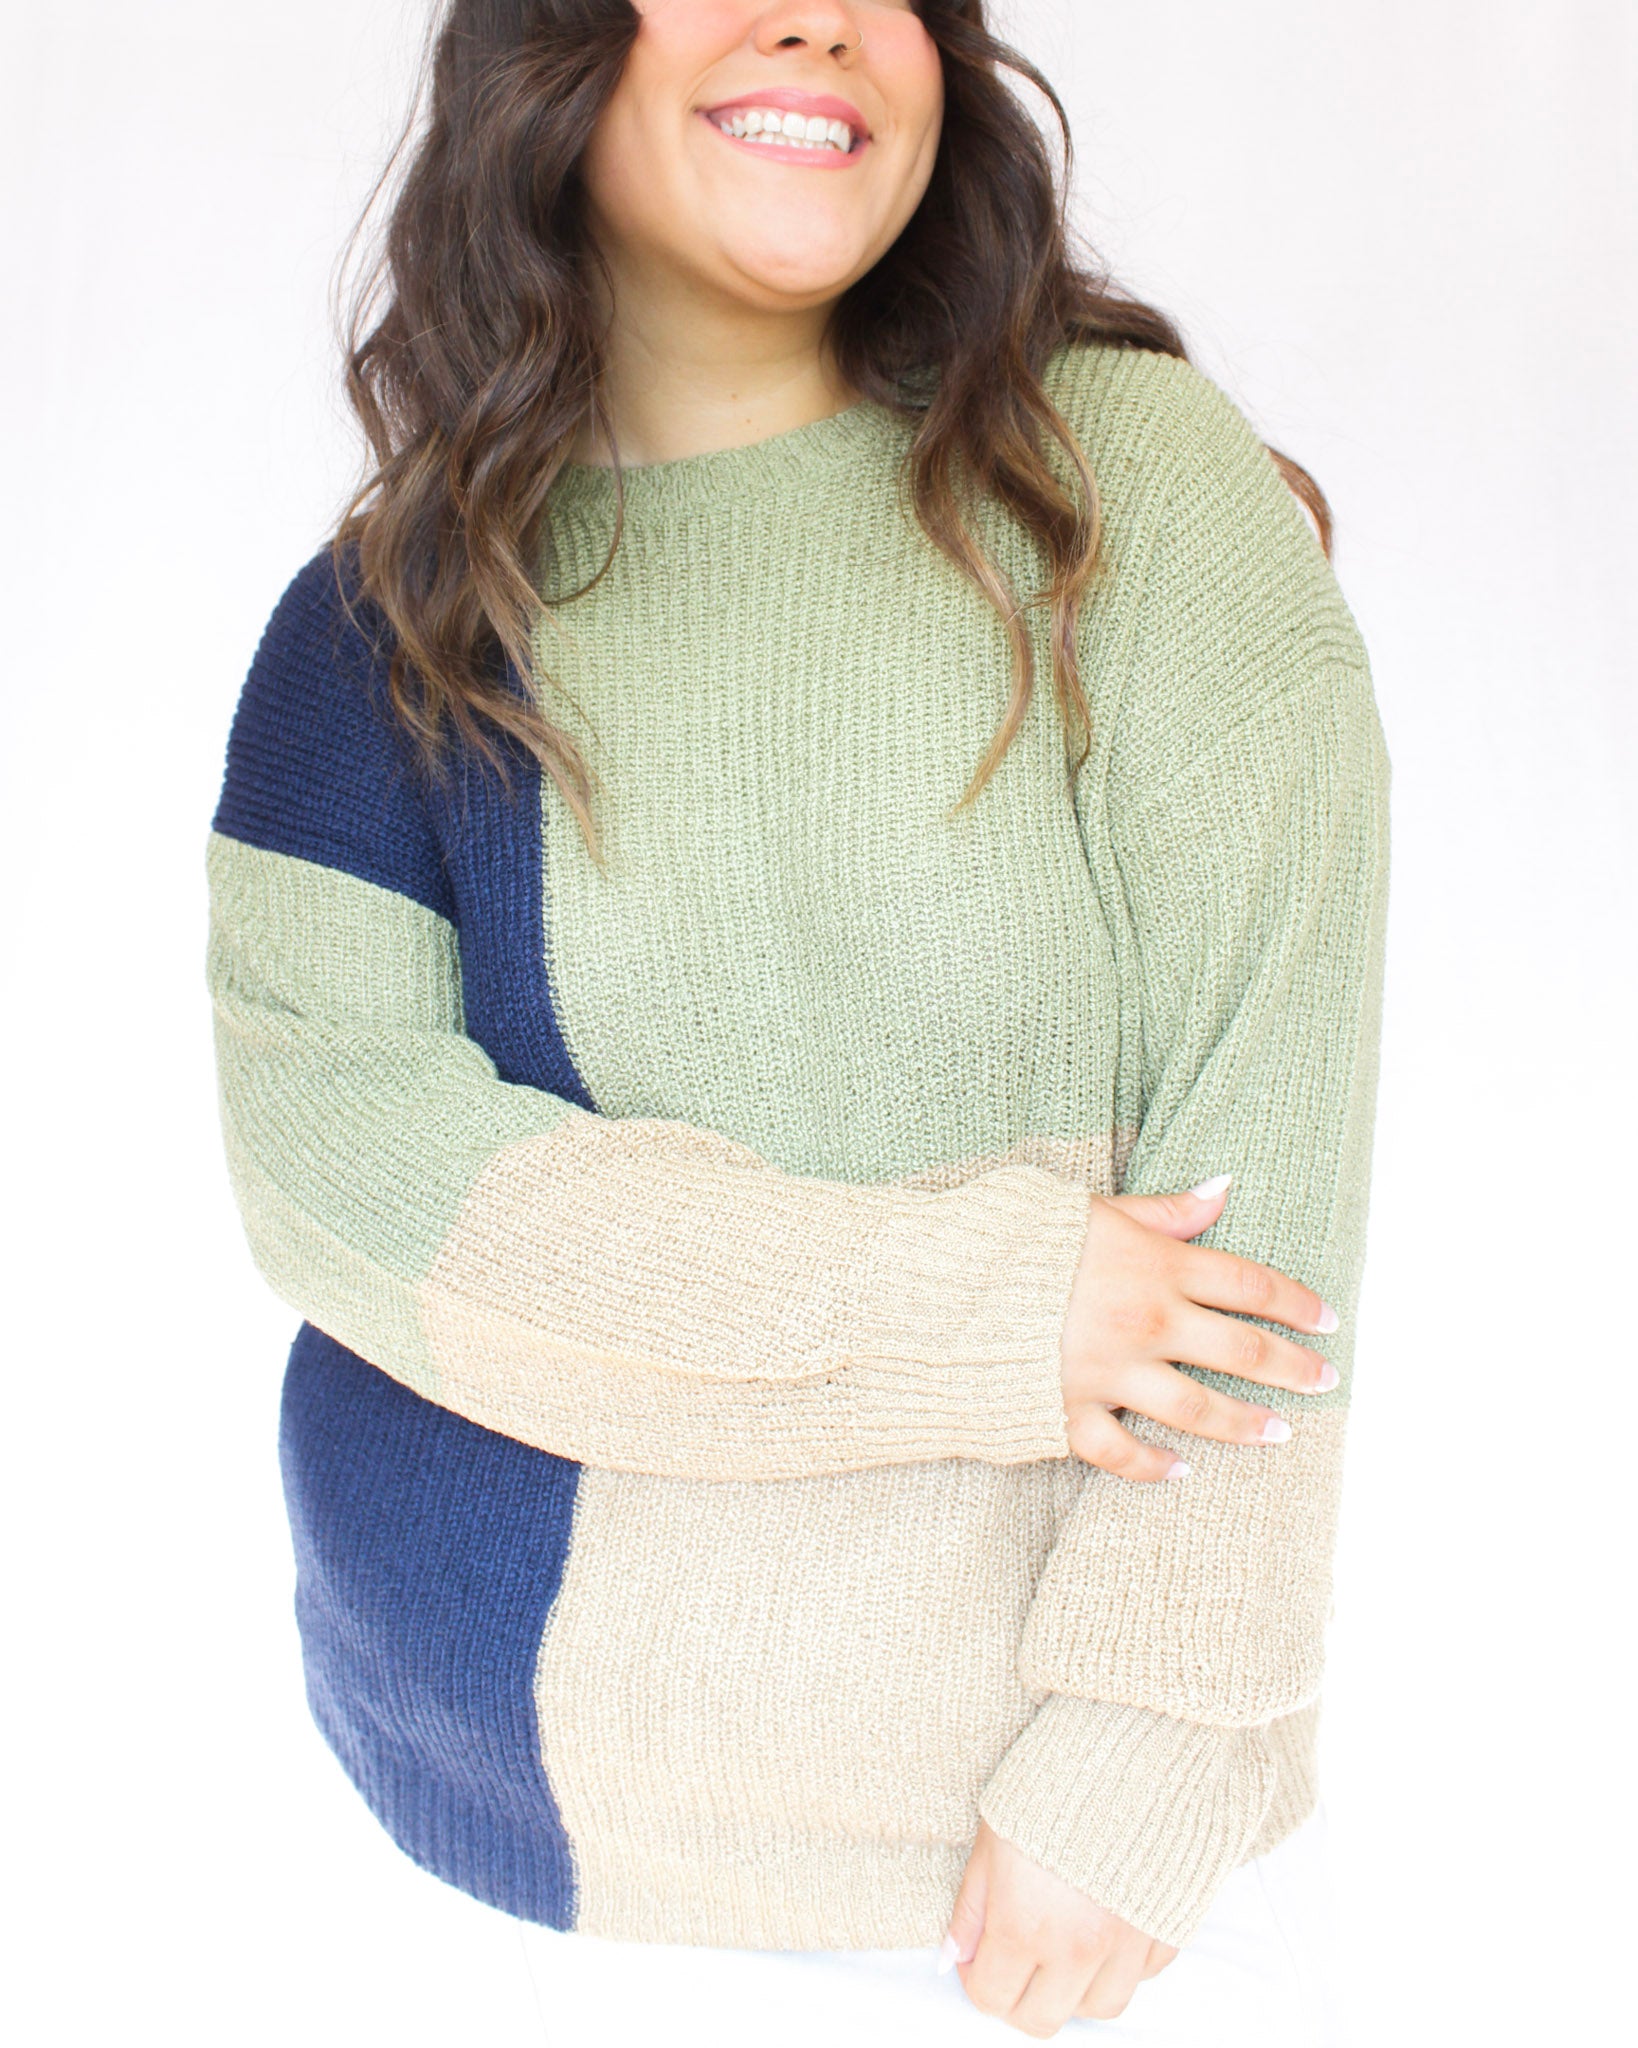 Colorblock lightweight full length sweater with green, blue, and tan